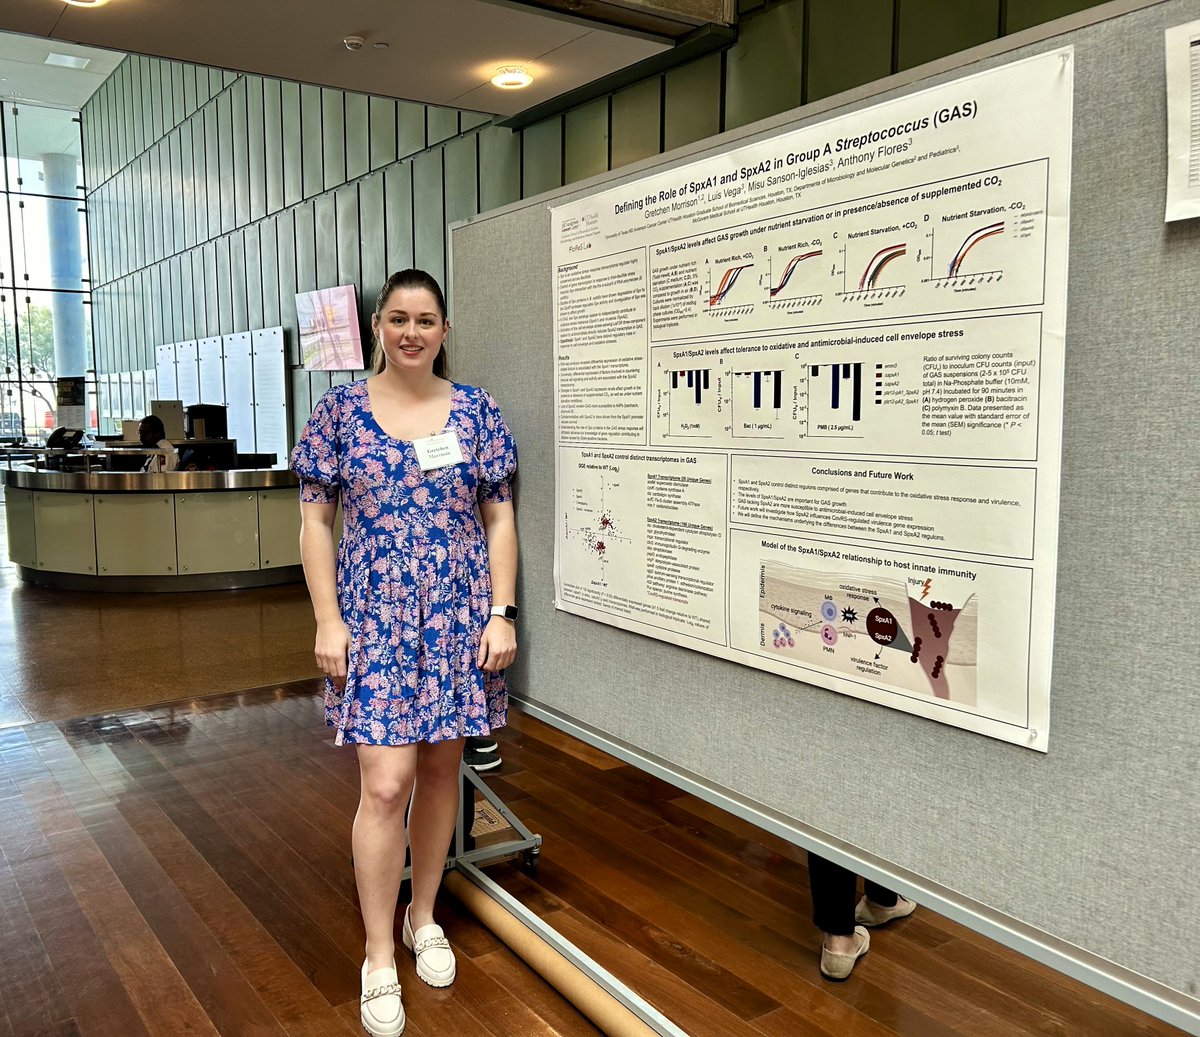 Congratulations to MID students, Dakota Archambault (Lorenz lab) & Gretchen Morrison (Flores lab), for each winning 3rd place at this year's UTHealth GSEC poster competition!  @UTHealthGSEC #WeAreGSBS